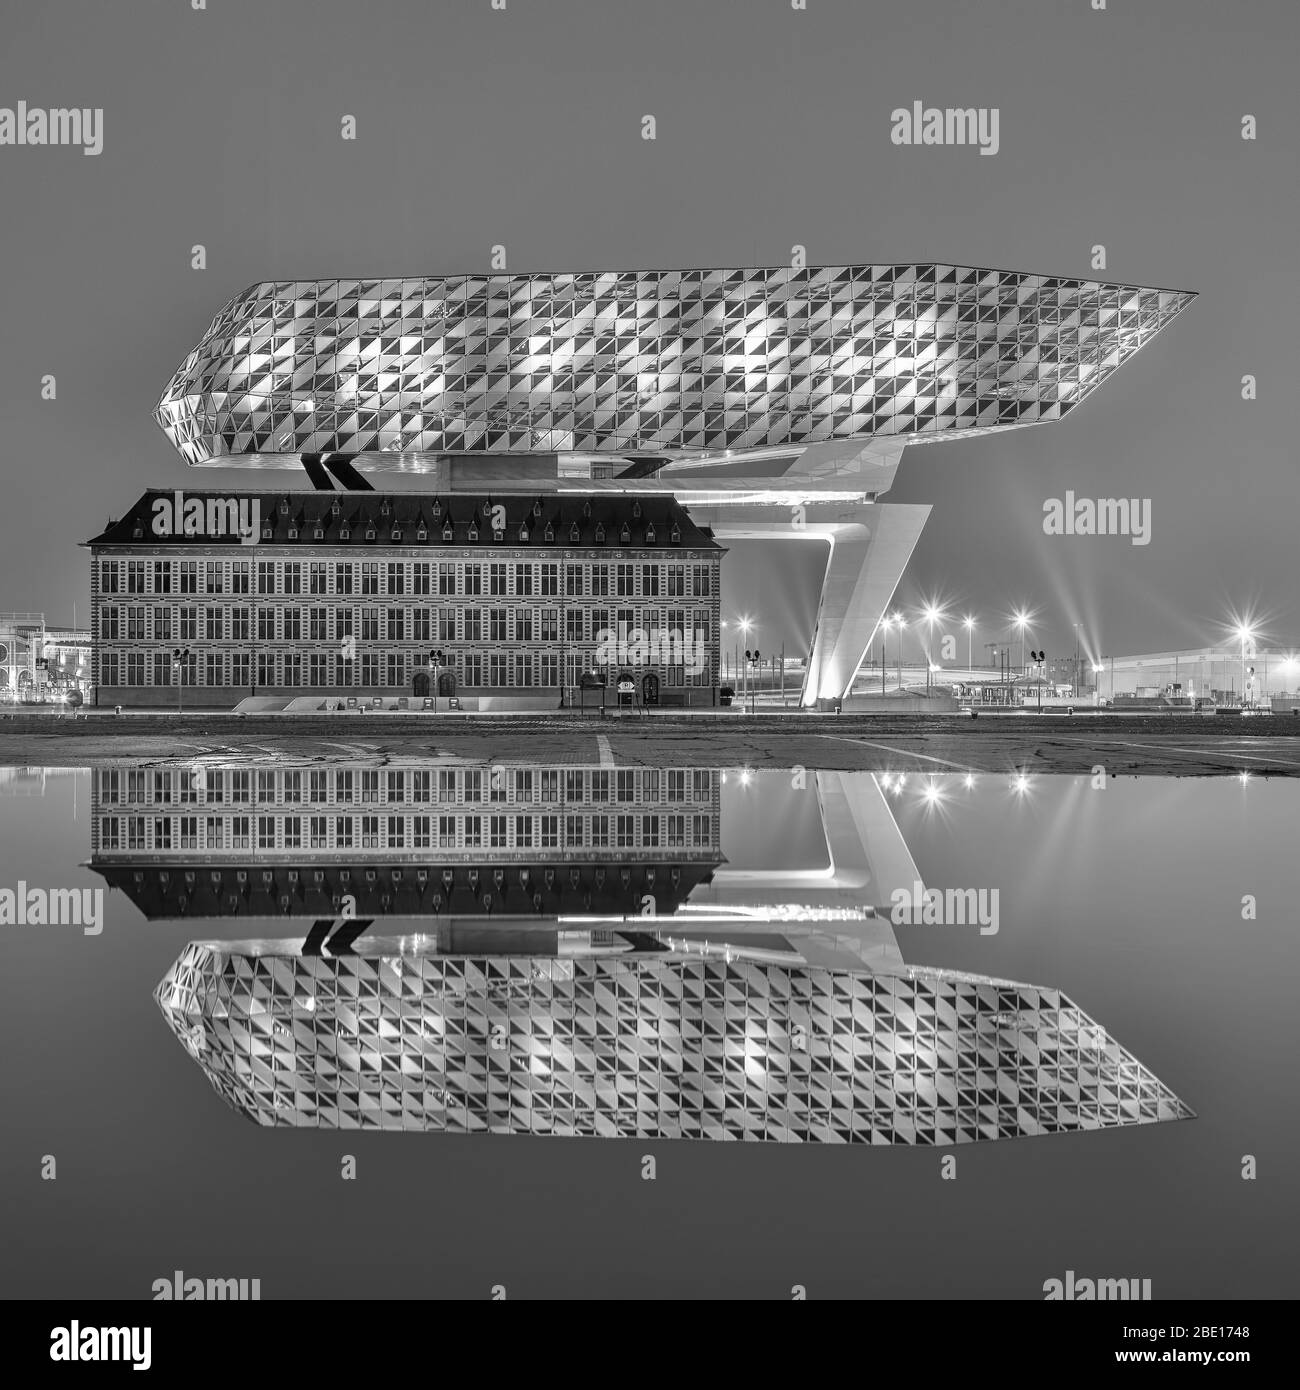 ANTWERP-DEC. 27, 2019. Port House reflected in a pond. Zaha Hadid Architects added glass extension to renovated fire station with total 12,800 sq. m. Stock Photo